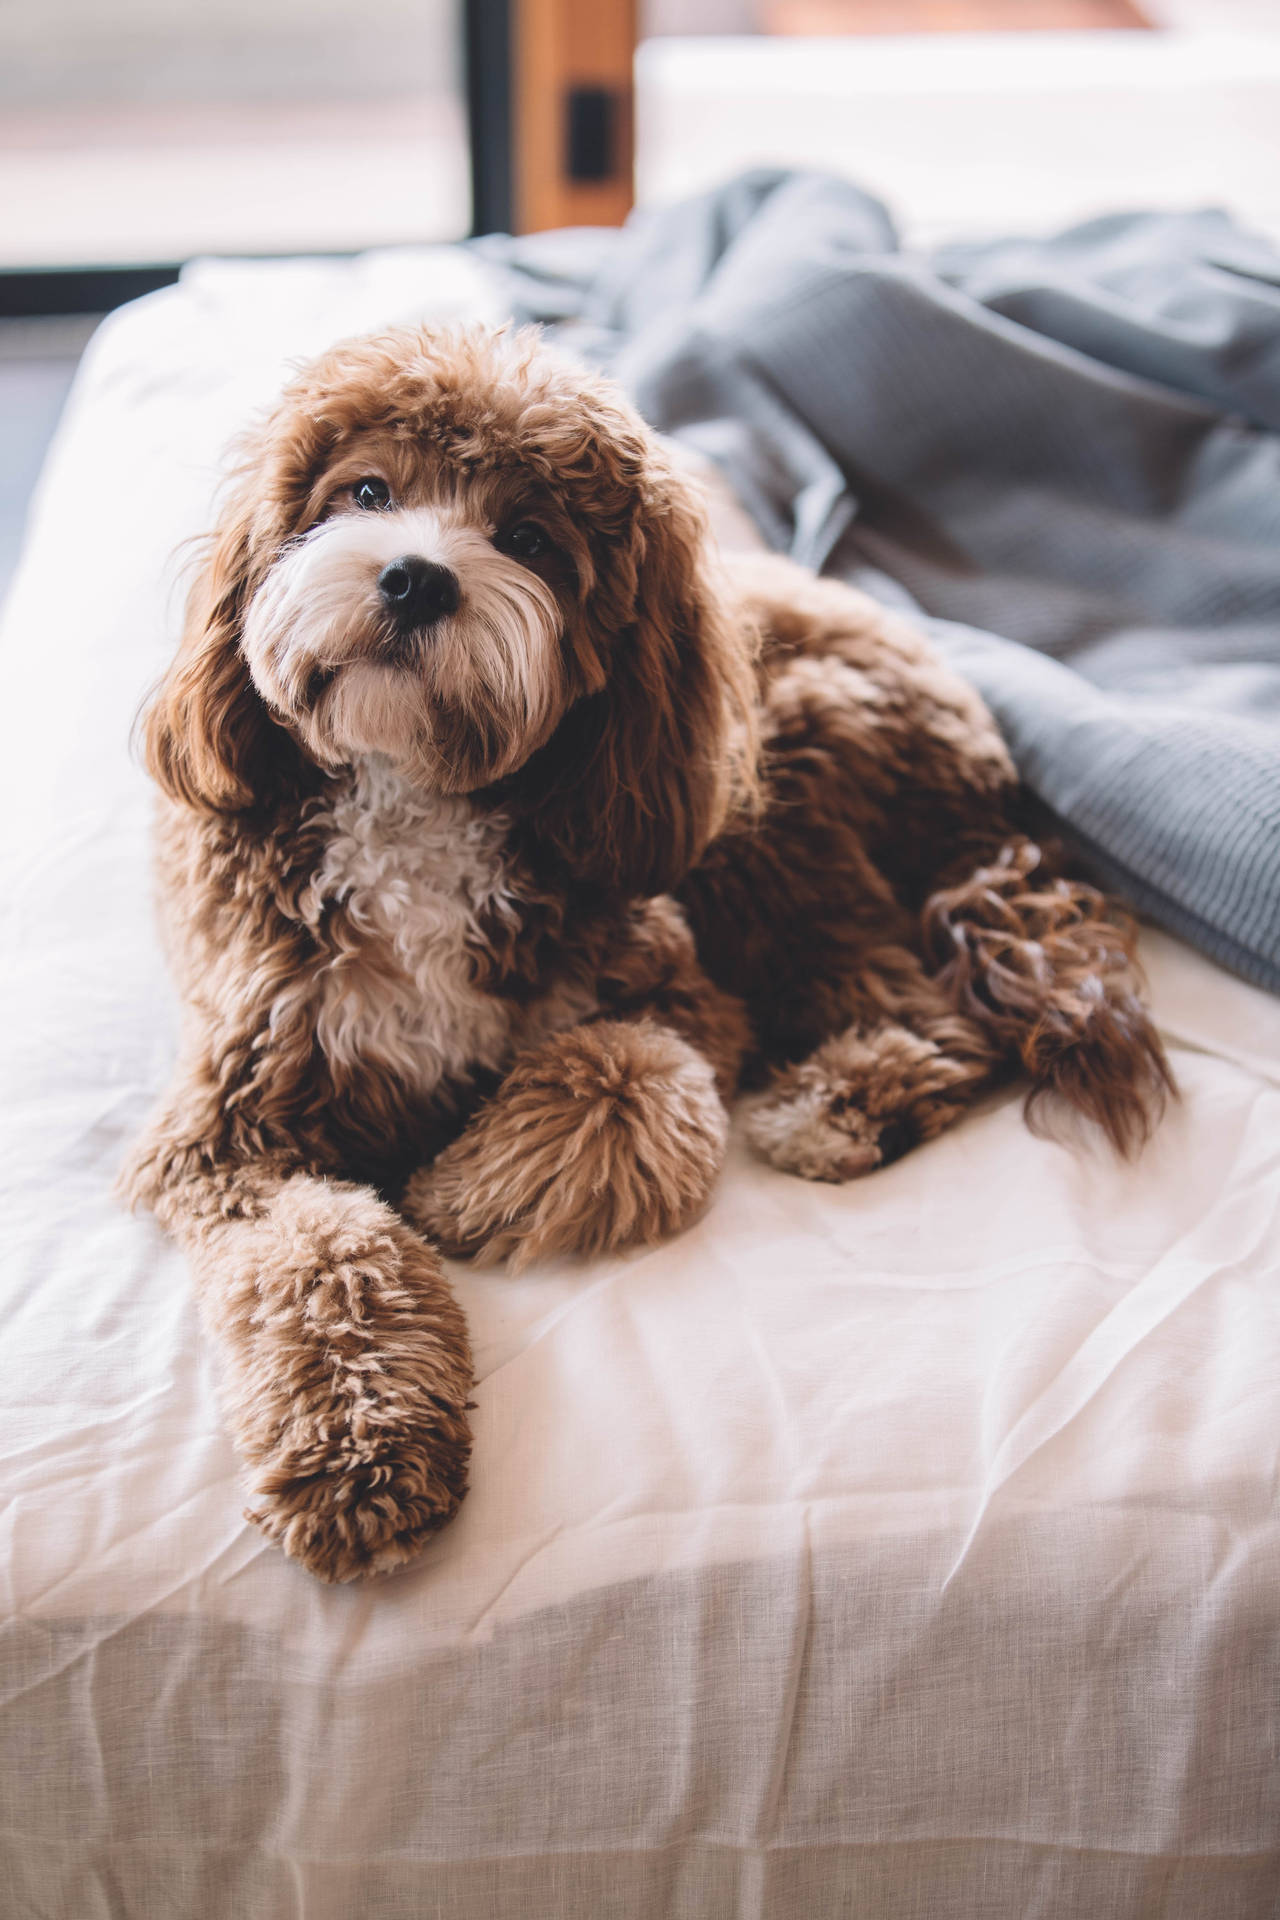 Cavapoo crossbreed dog on bed mobile wallpaper.